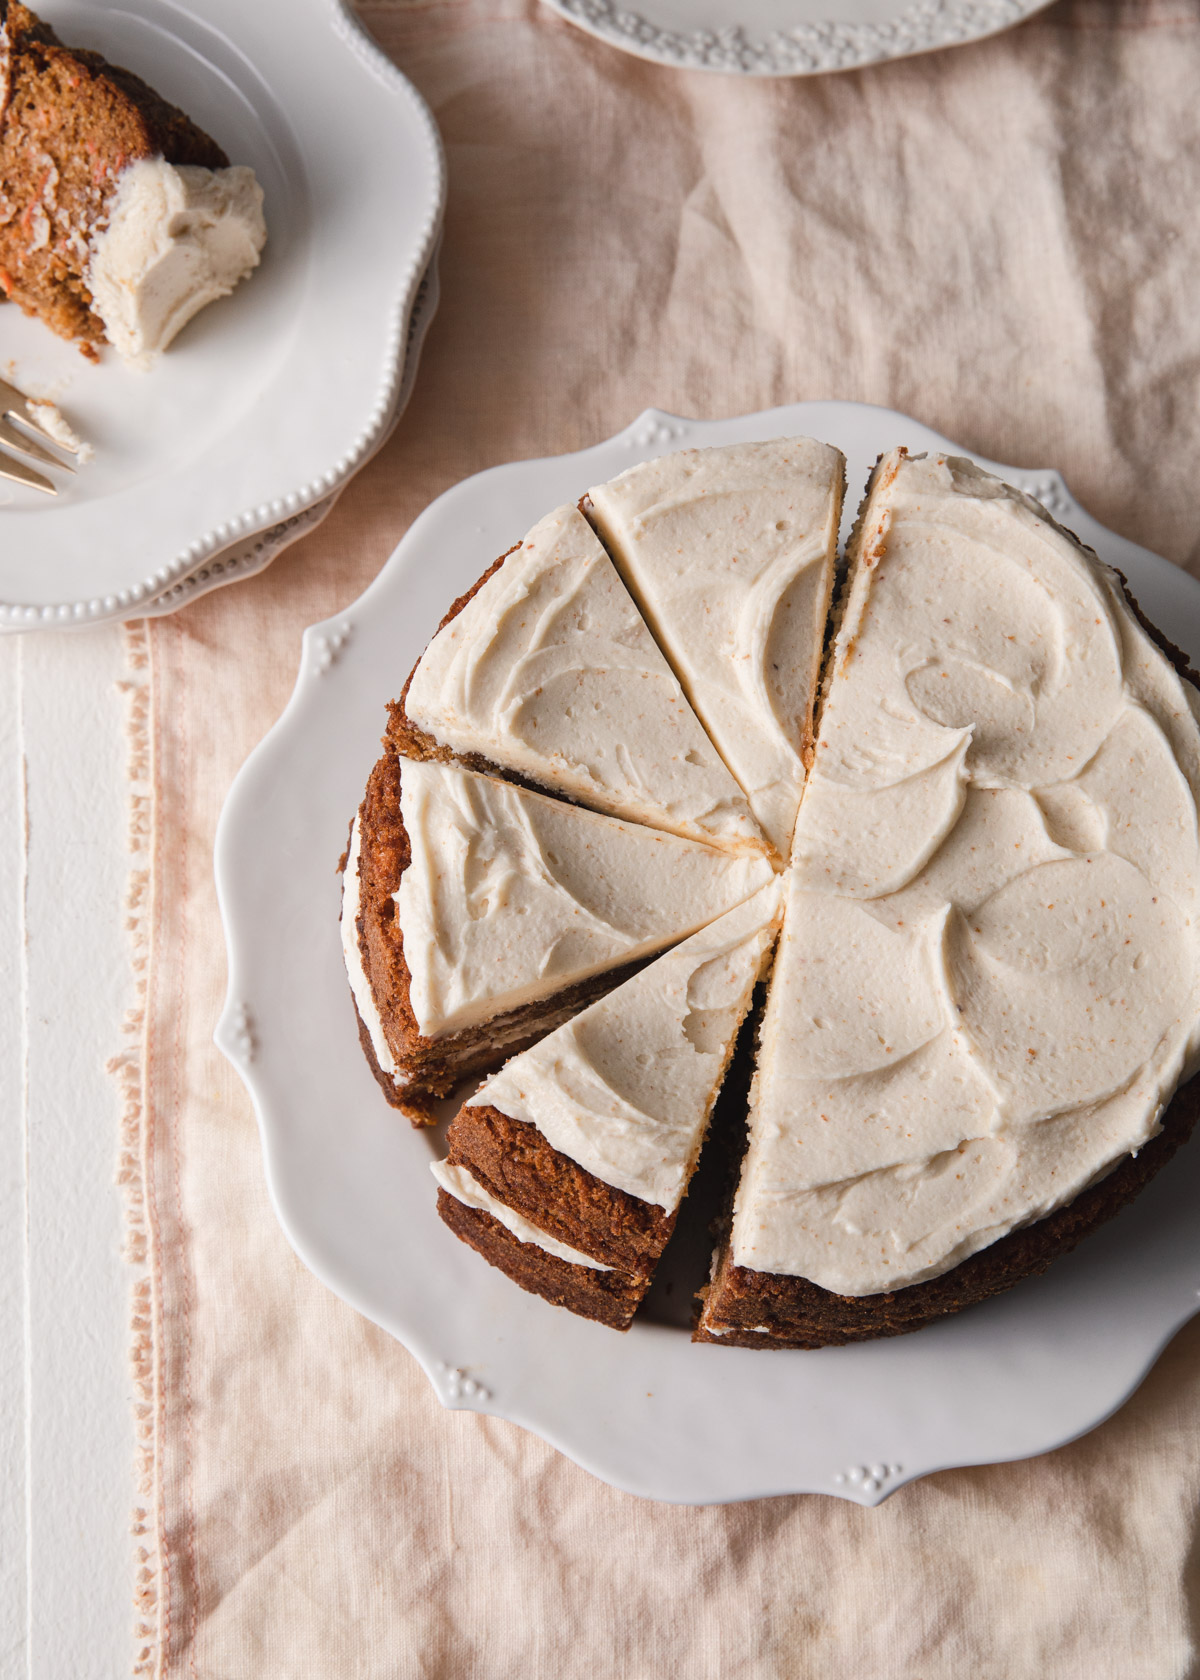 An overhead image of a carrot cake with swoops of brown butter frosting